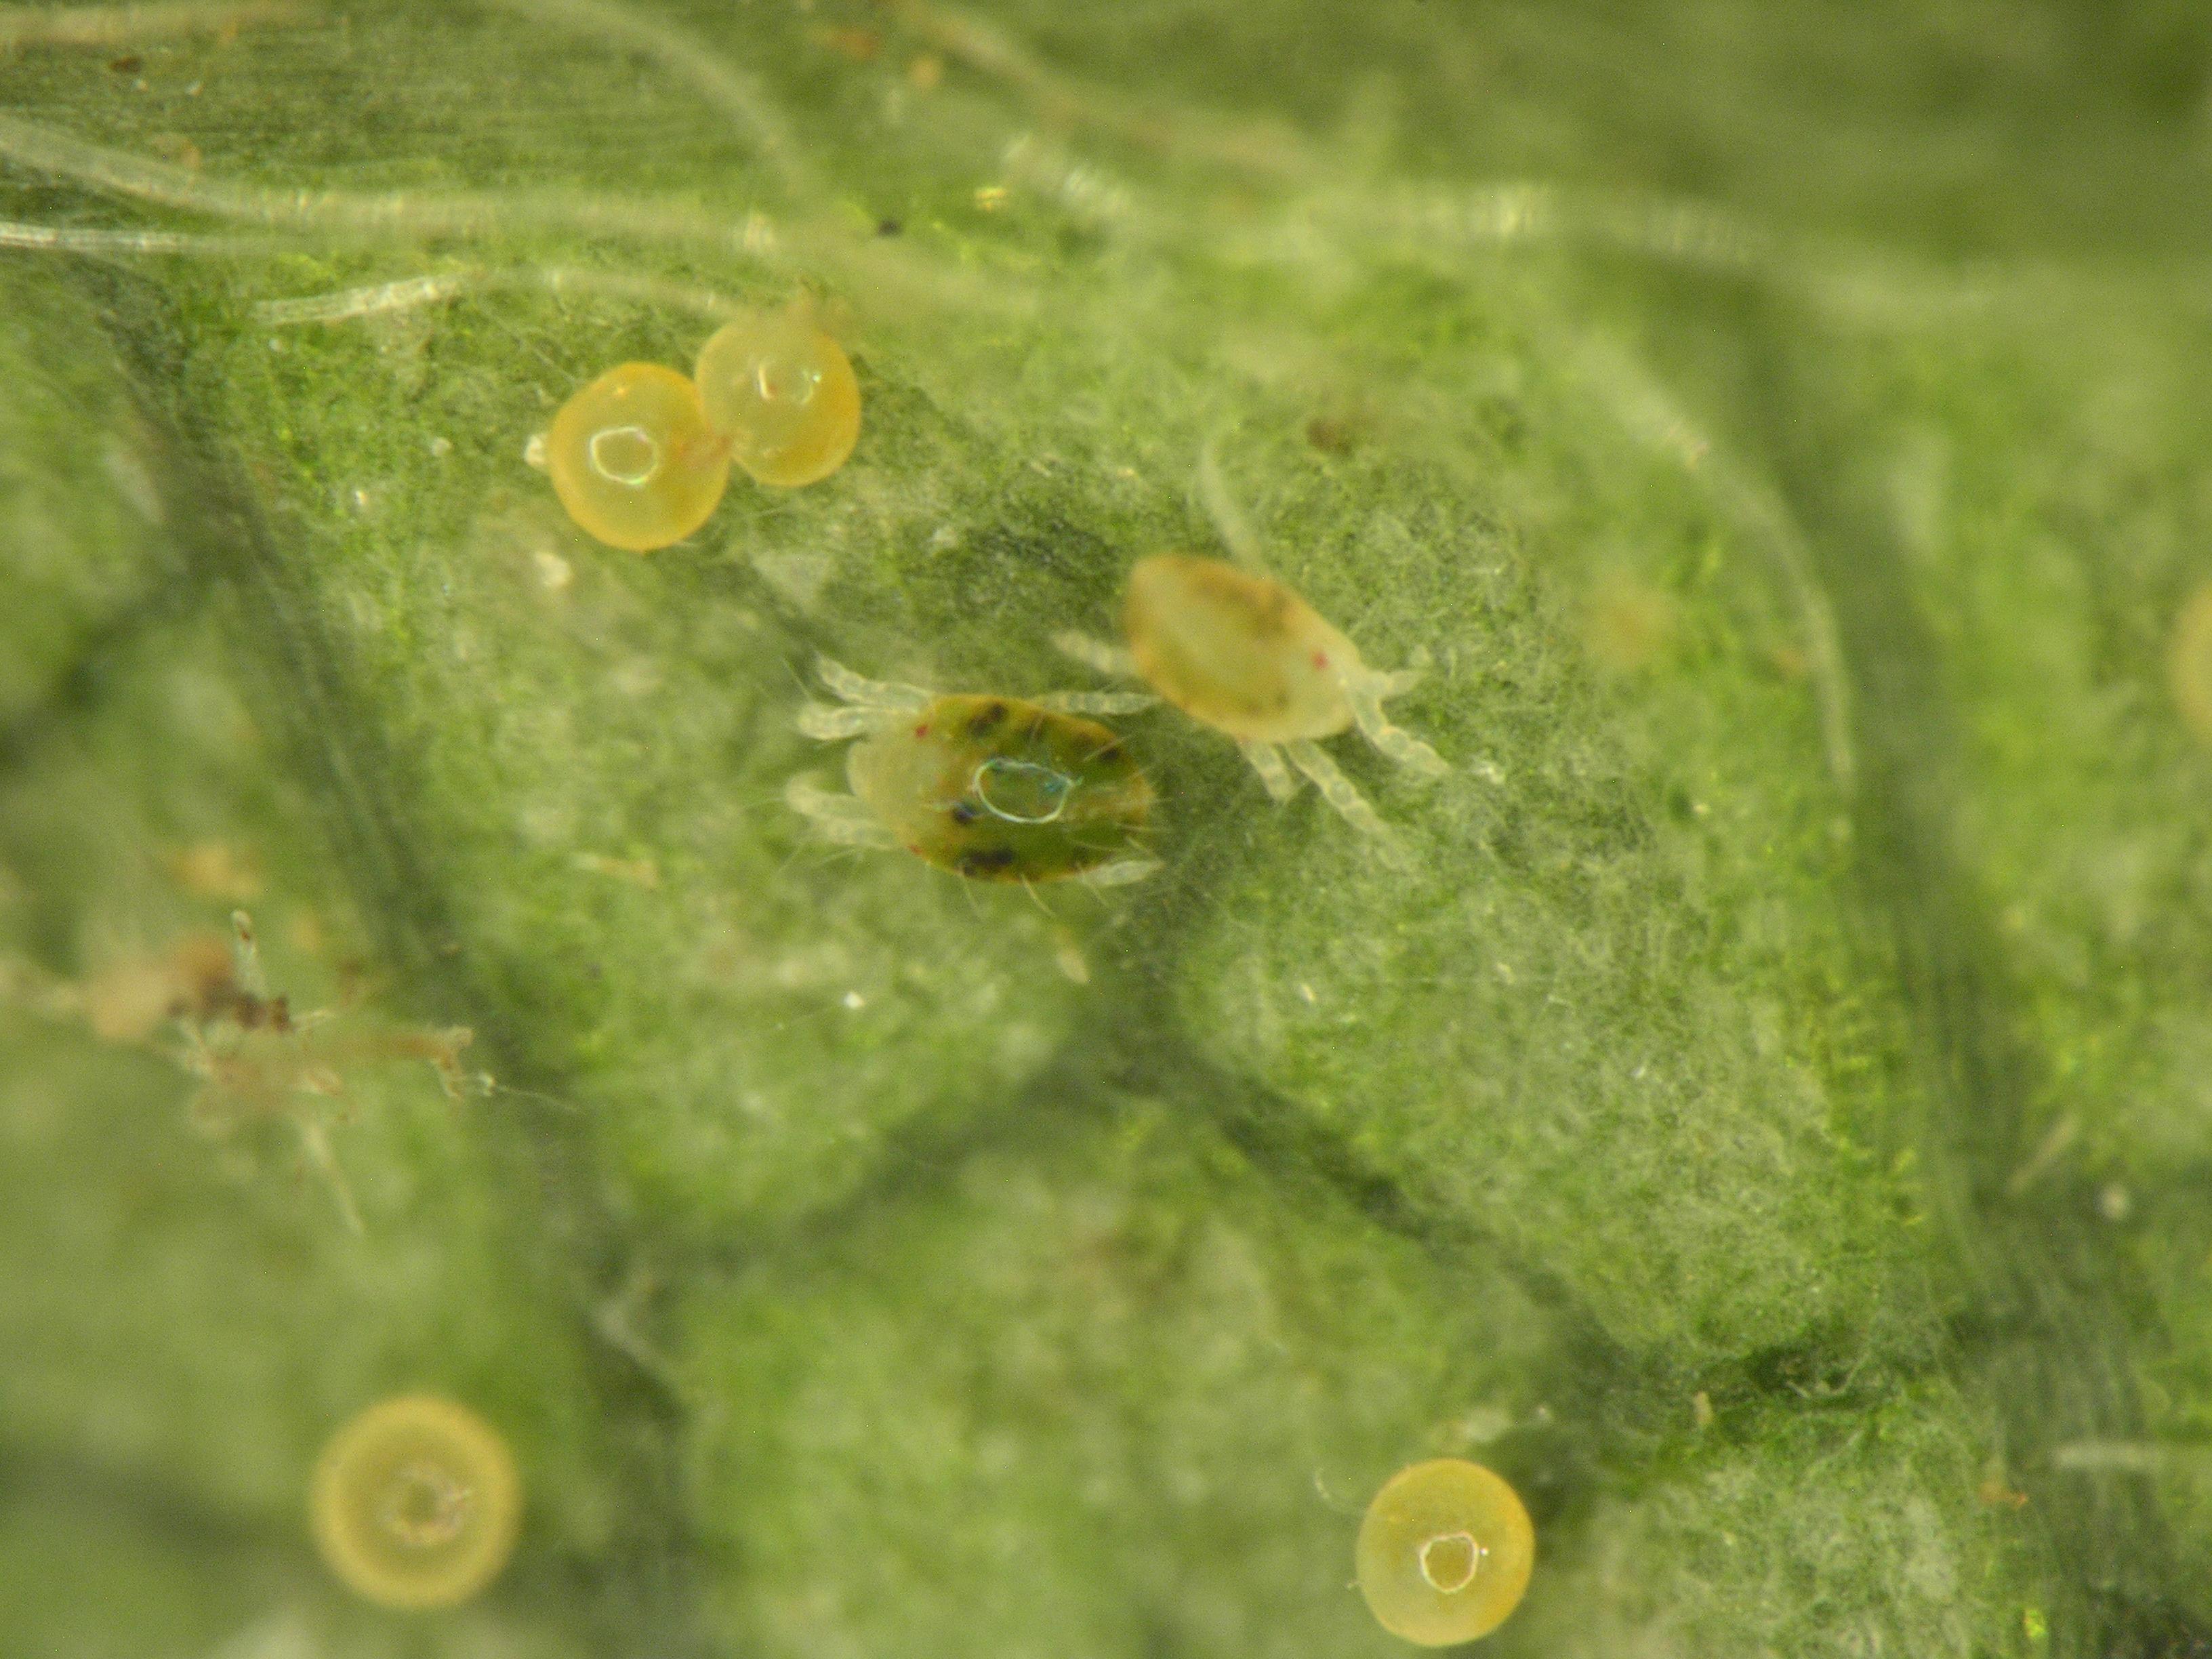 Mites (center with visible legs) and eggs (round, no legs, at arrows). 